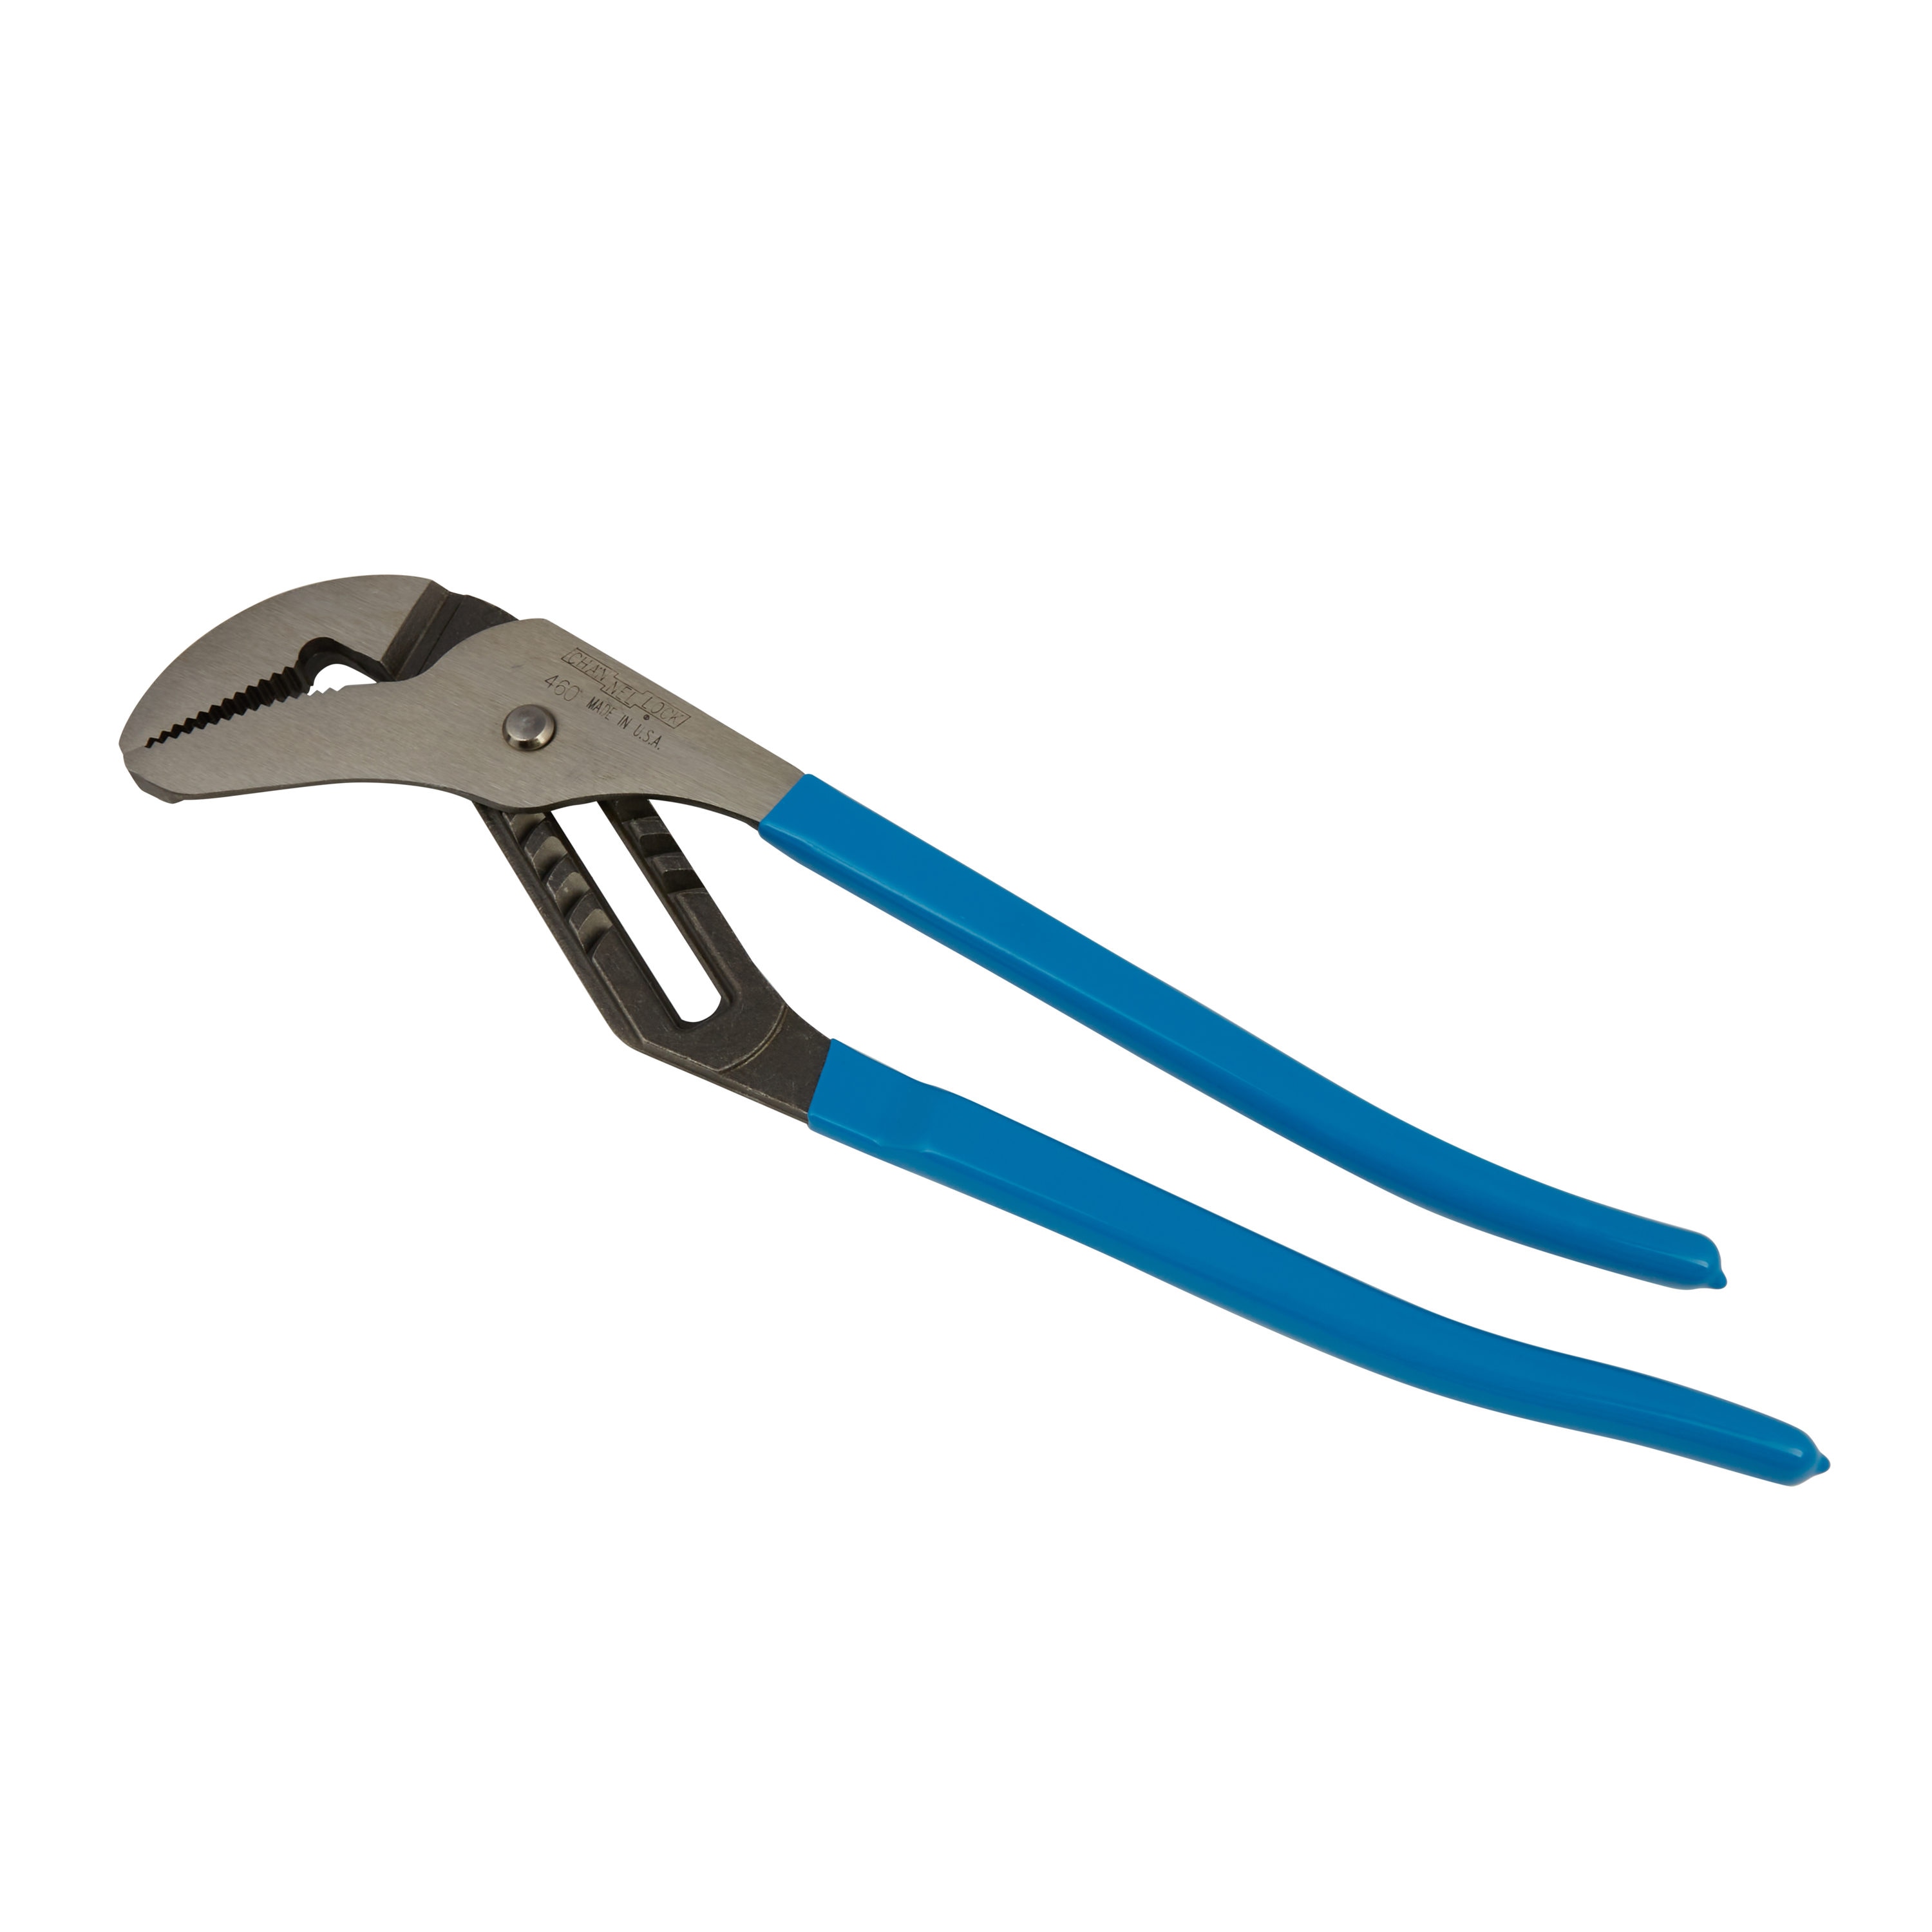 CHANNELLOCK 16.5-in Plumbing Tongue and Groove Pliers